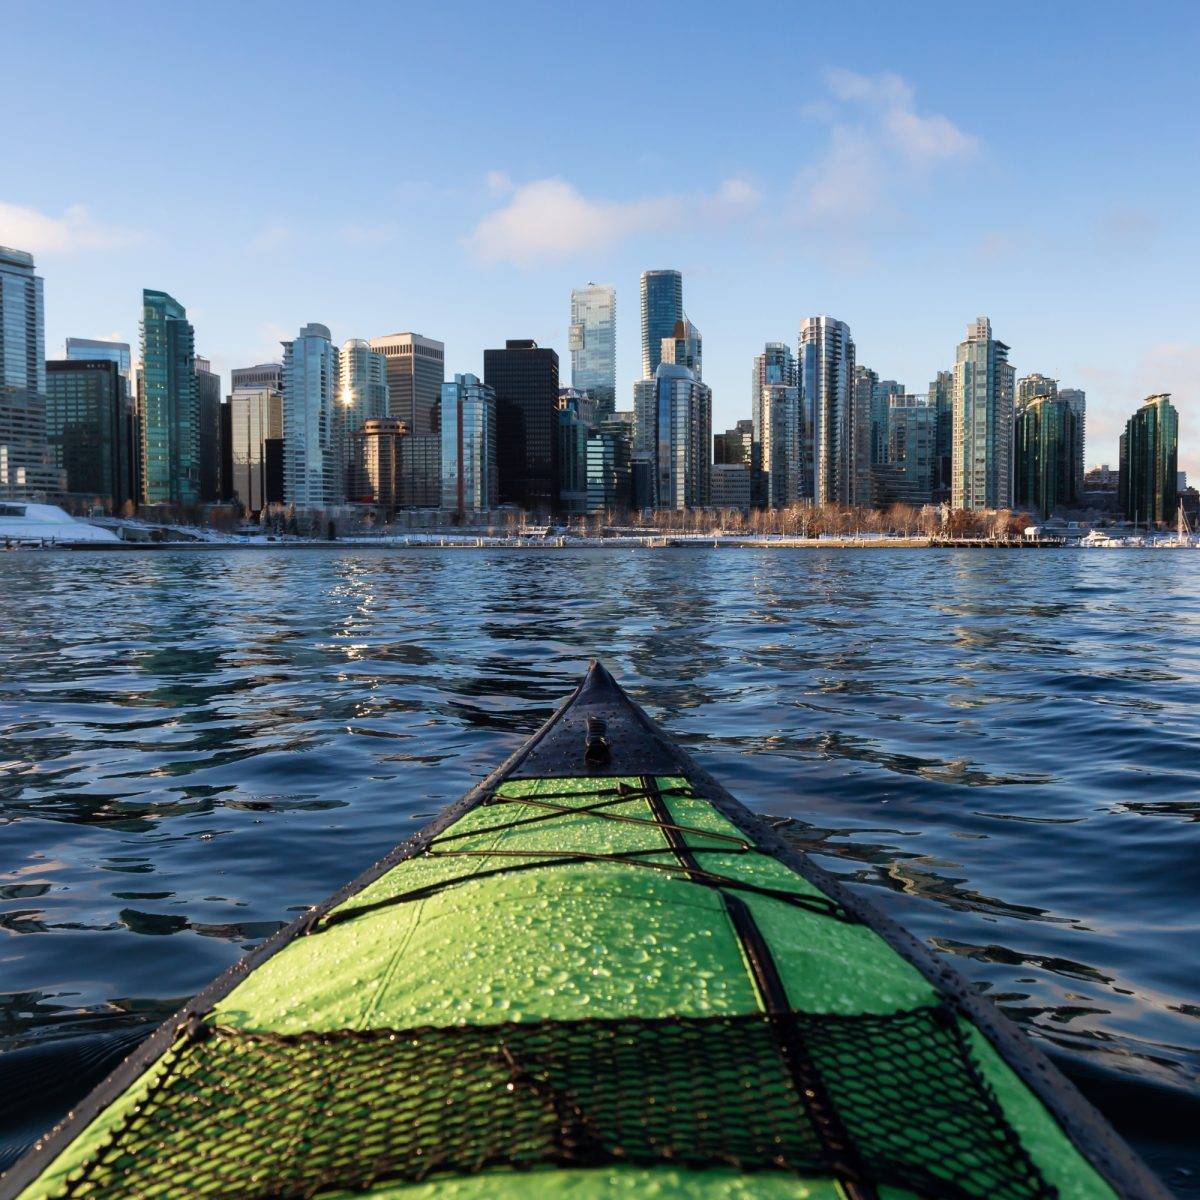 On a canoe in Vancouver seeing stunning buildings from the water.